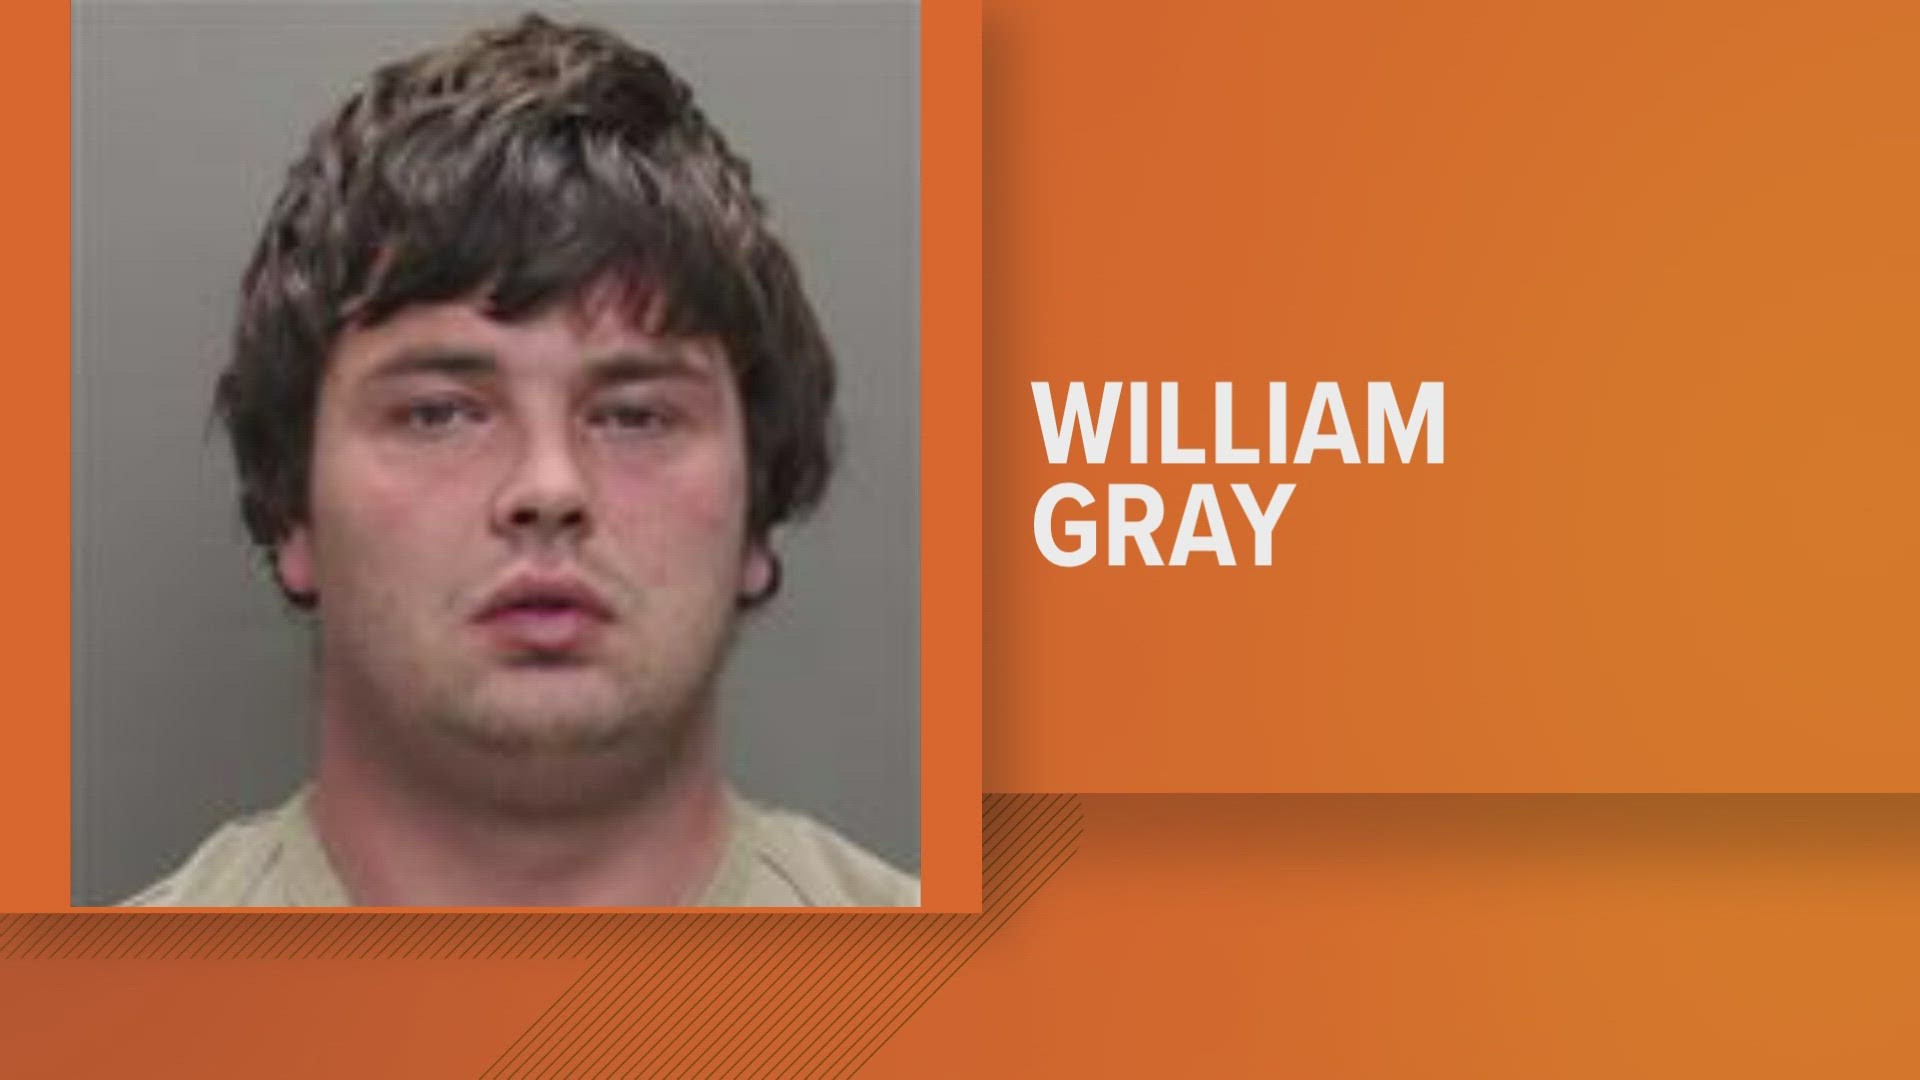 William Gray, 27, is charged with murder.